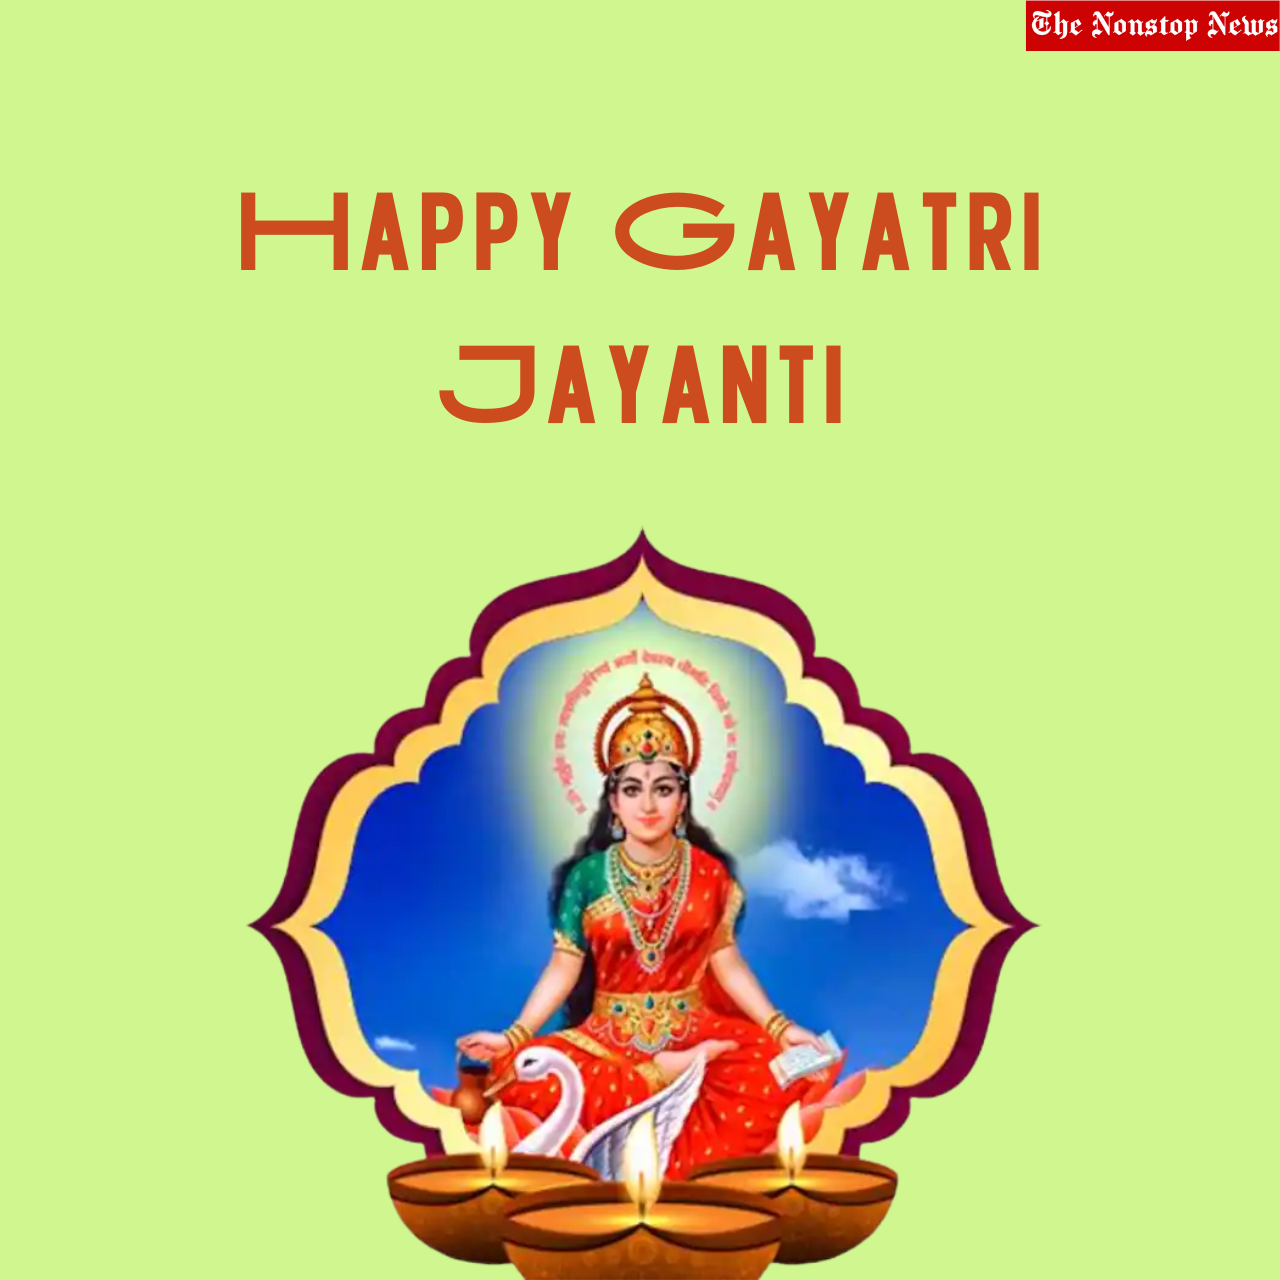 Gayatri Jayanti 2022: Date, Story, Wishes, Quotes, Images, Messages, Shayari, and Greetings to Share